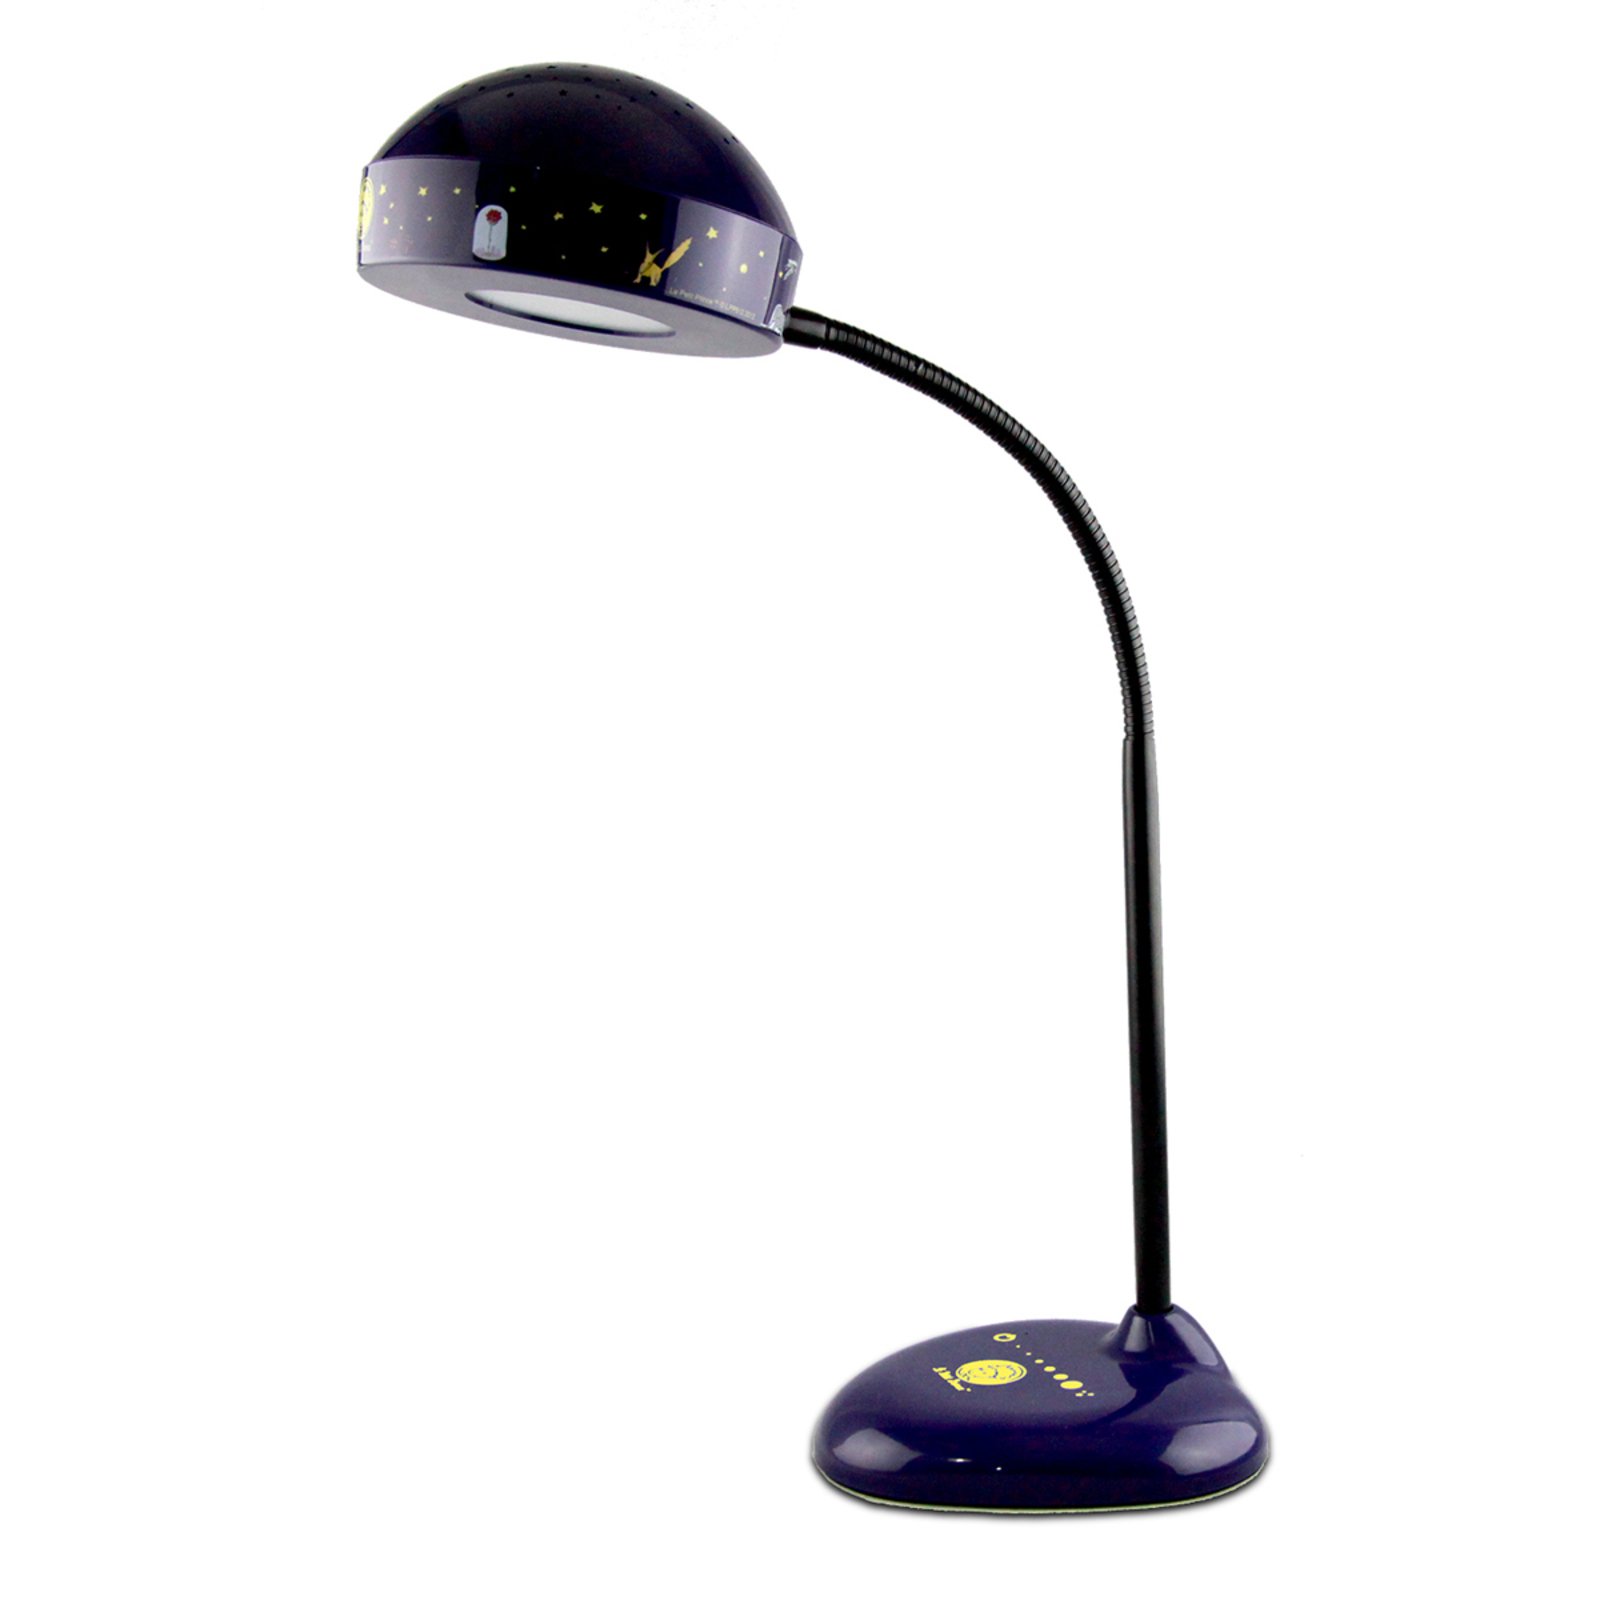 Little Prince LED desk lamp with night light